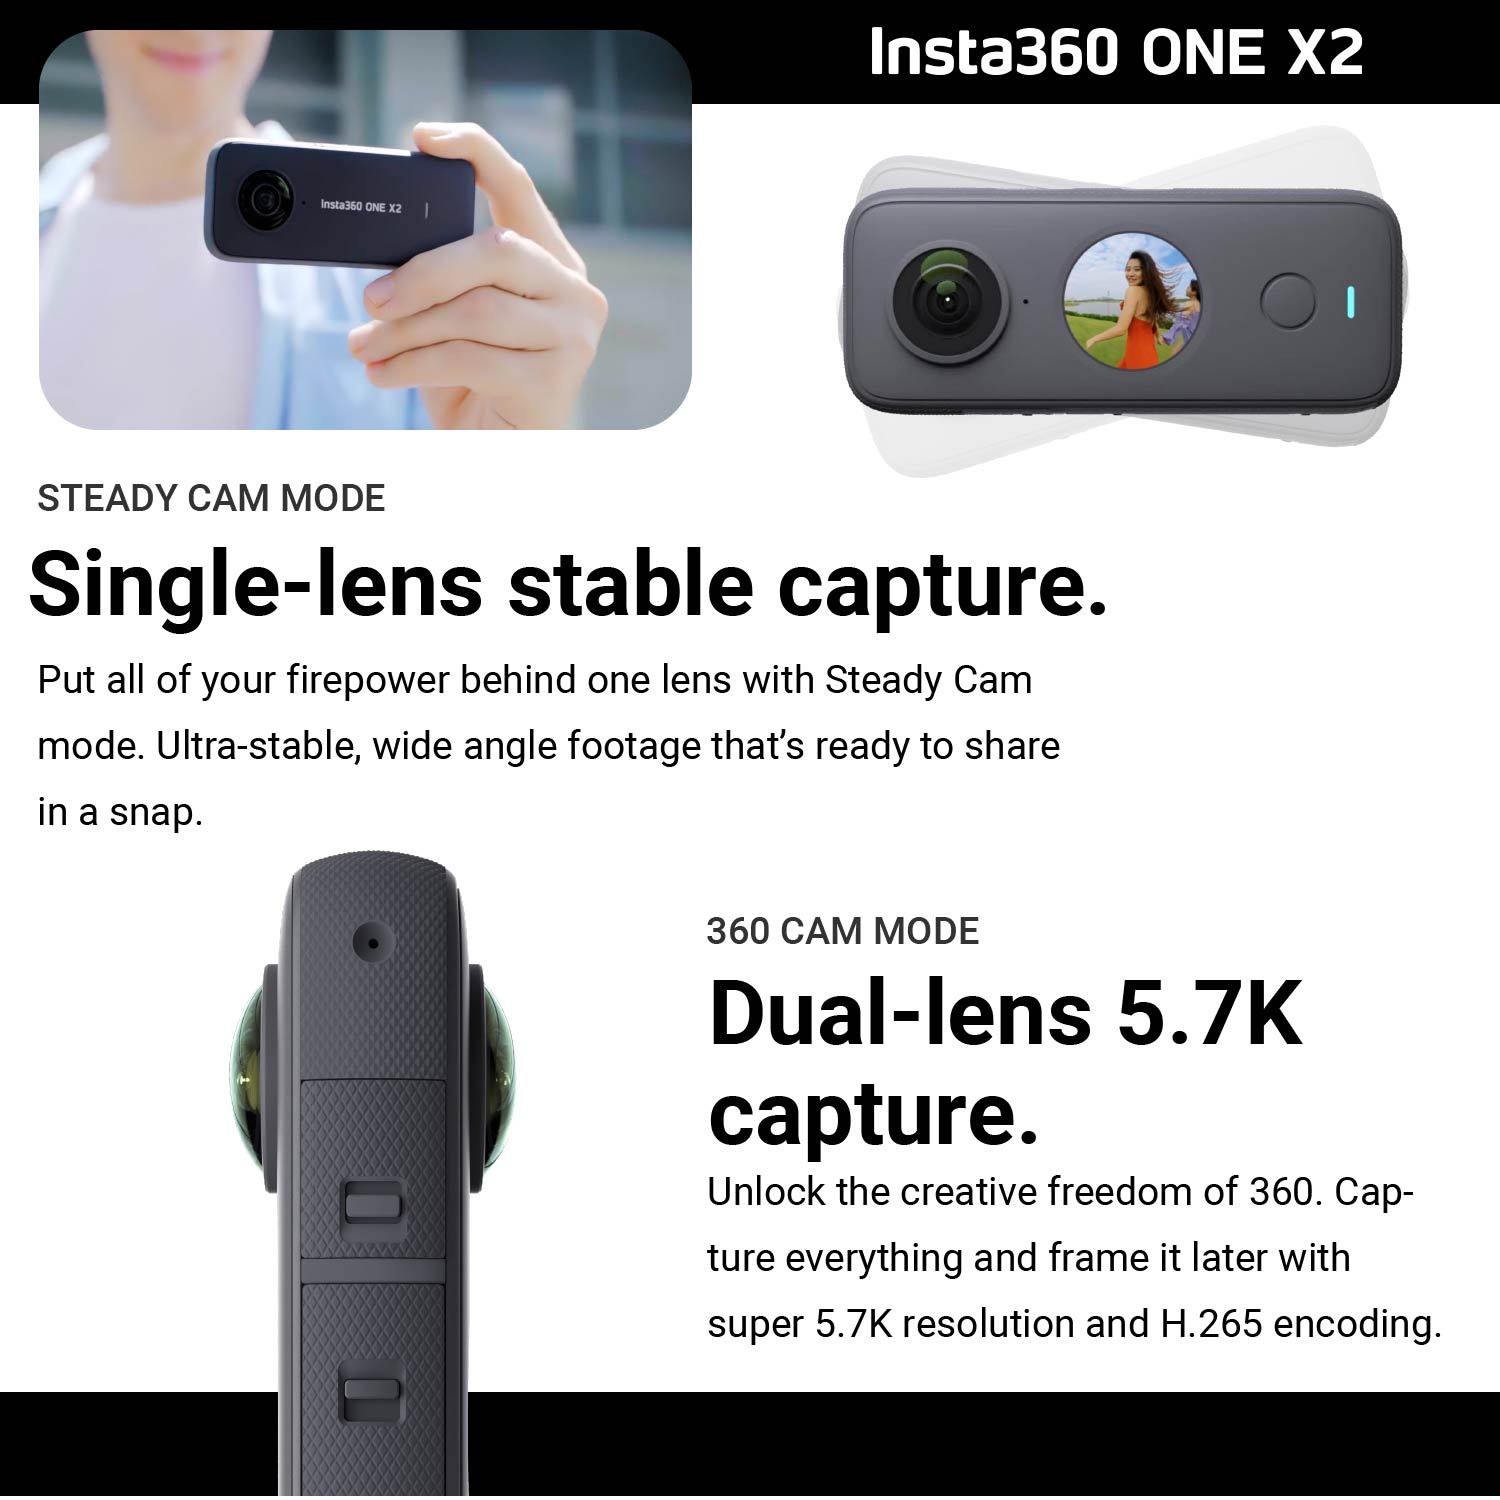 First Look: Insta360 ONE X2 Steady Cam - TidBITS